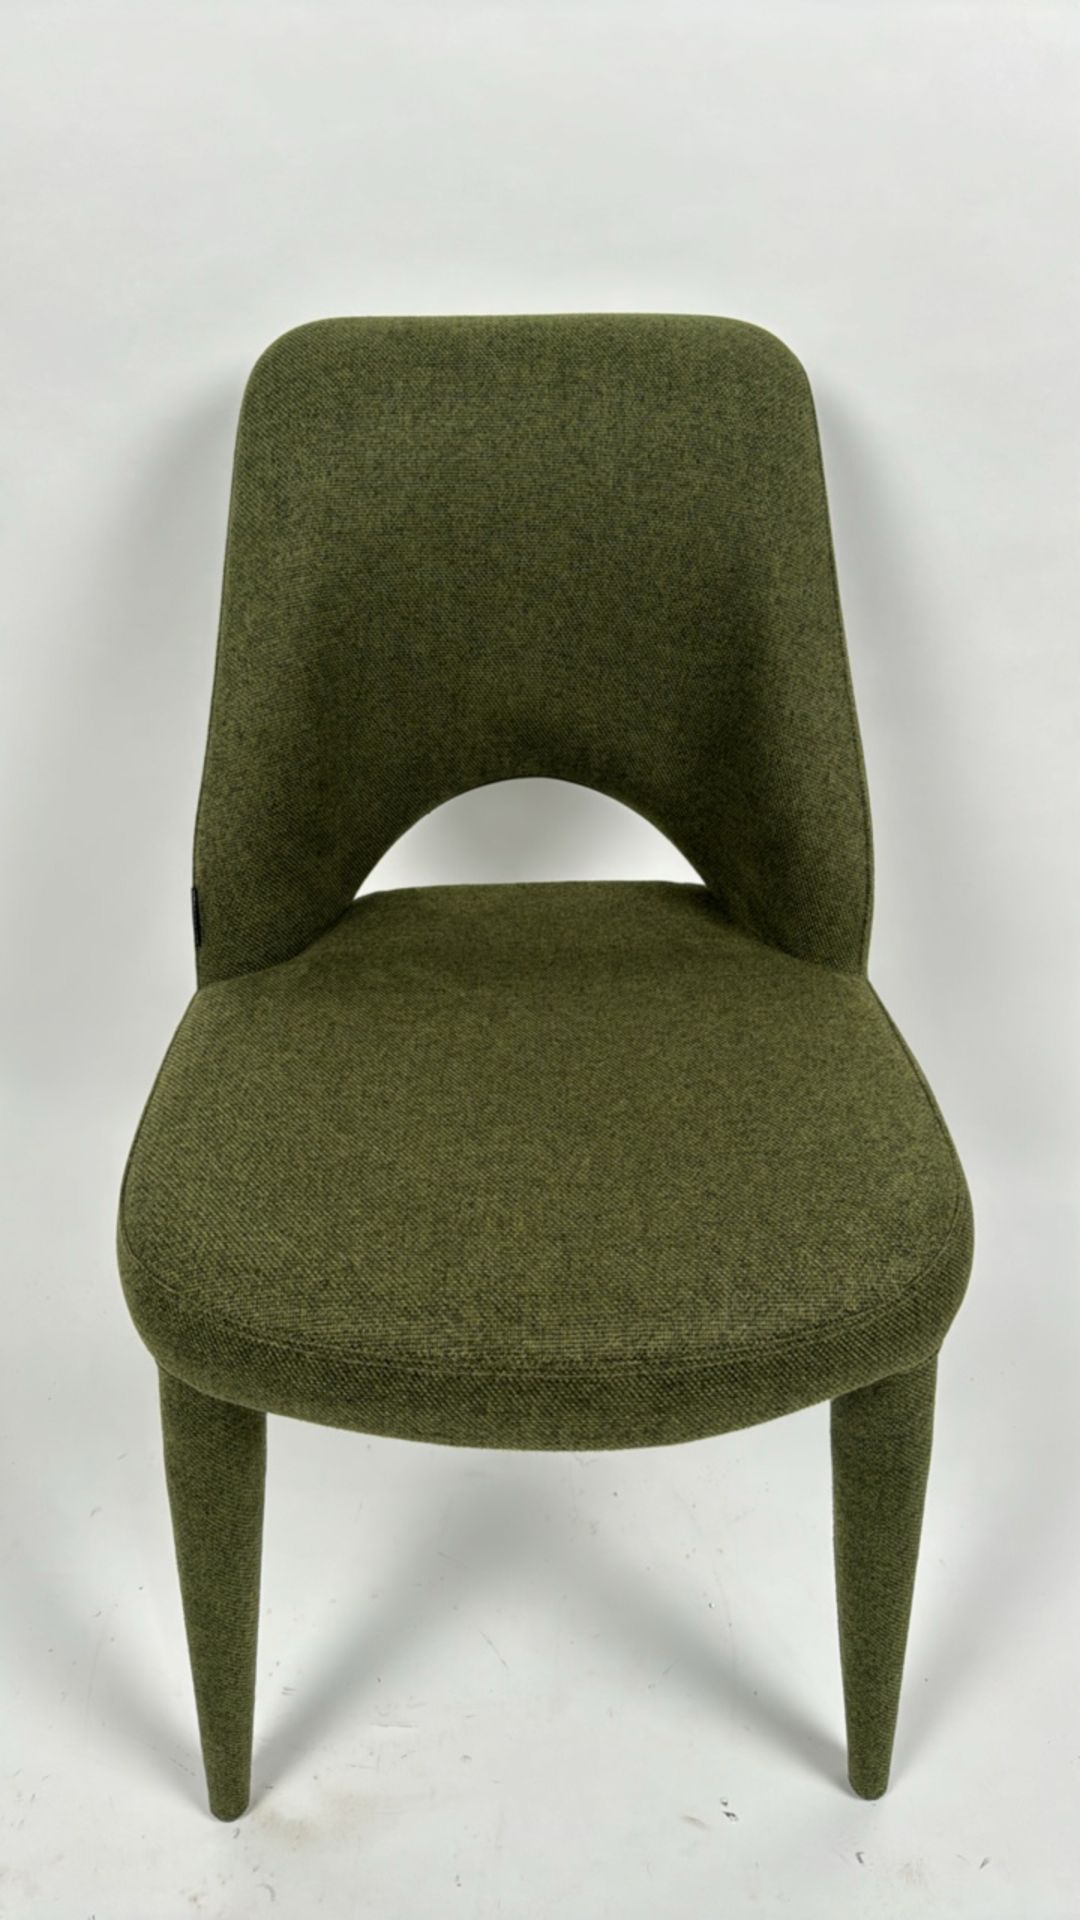 Pols Potten Holy Padded Chair Forest Green - Image 3 of 5